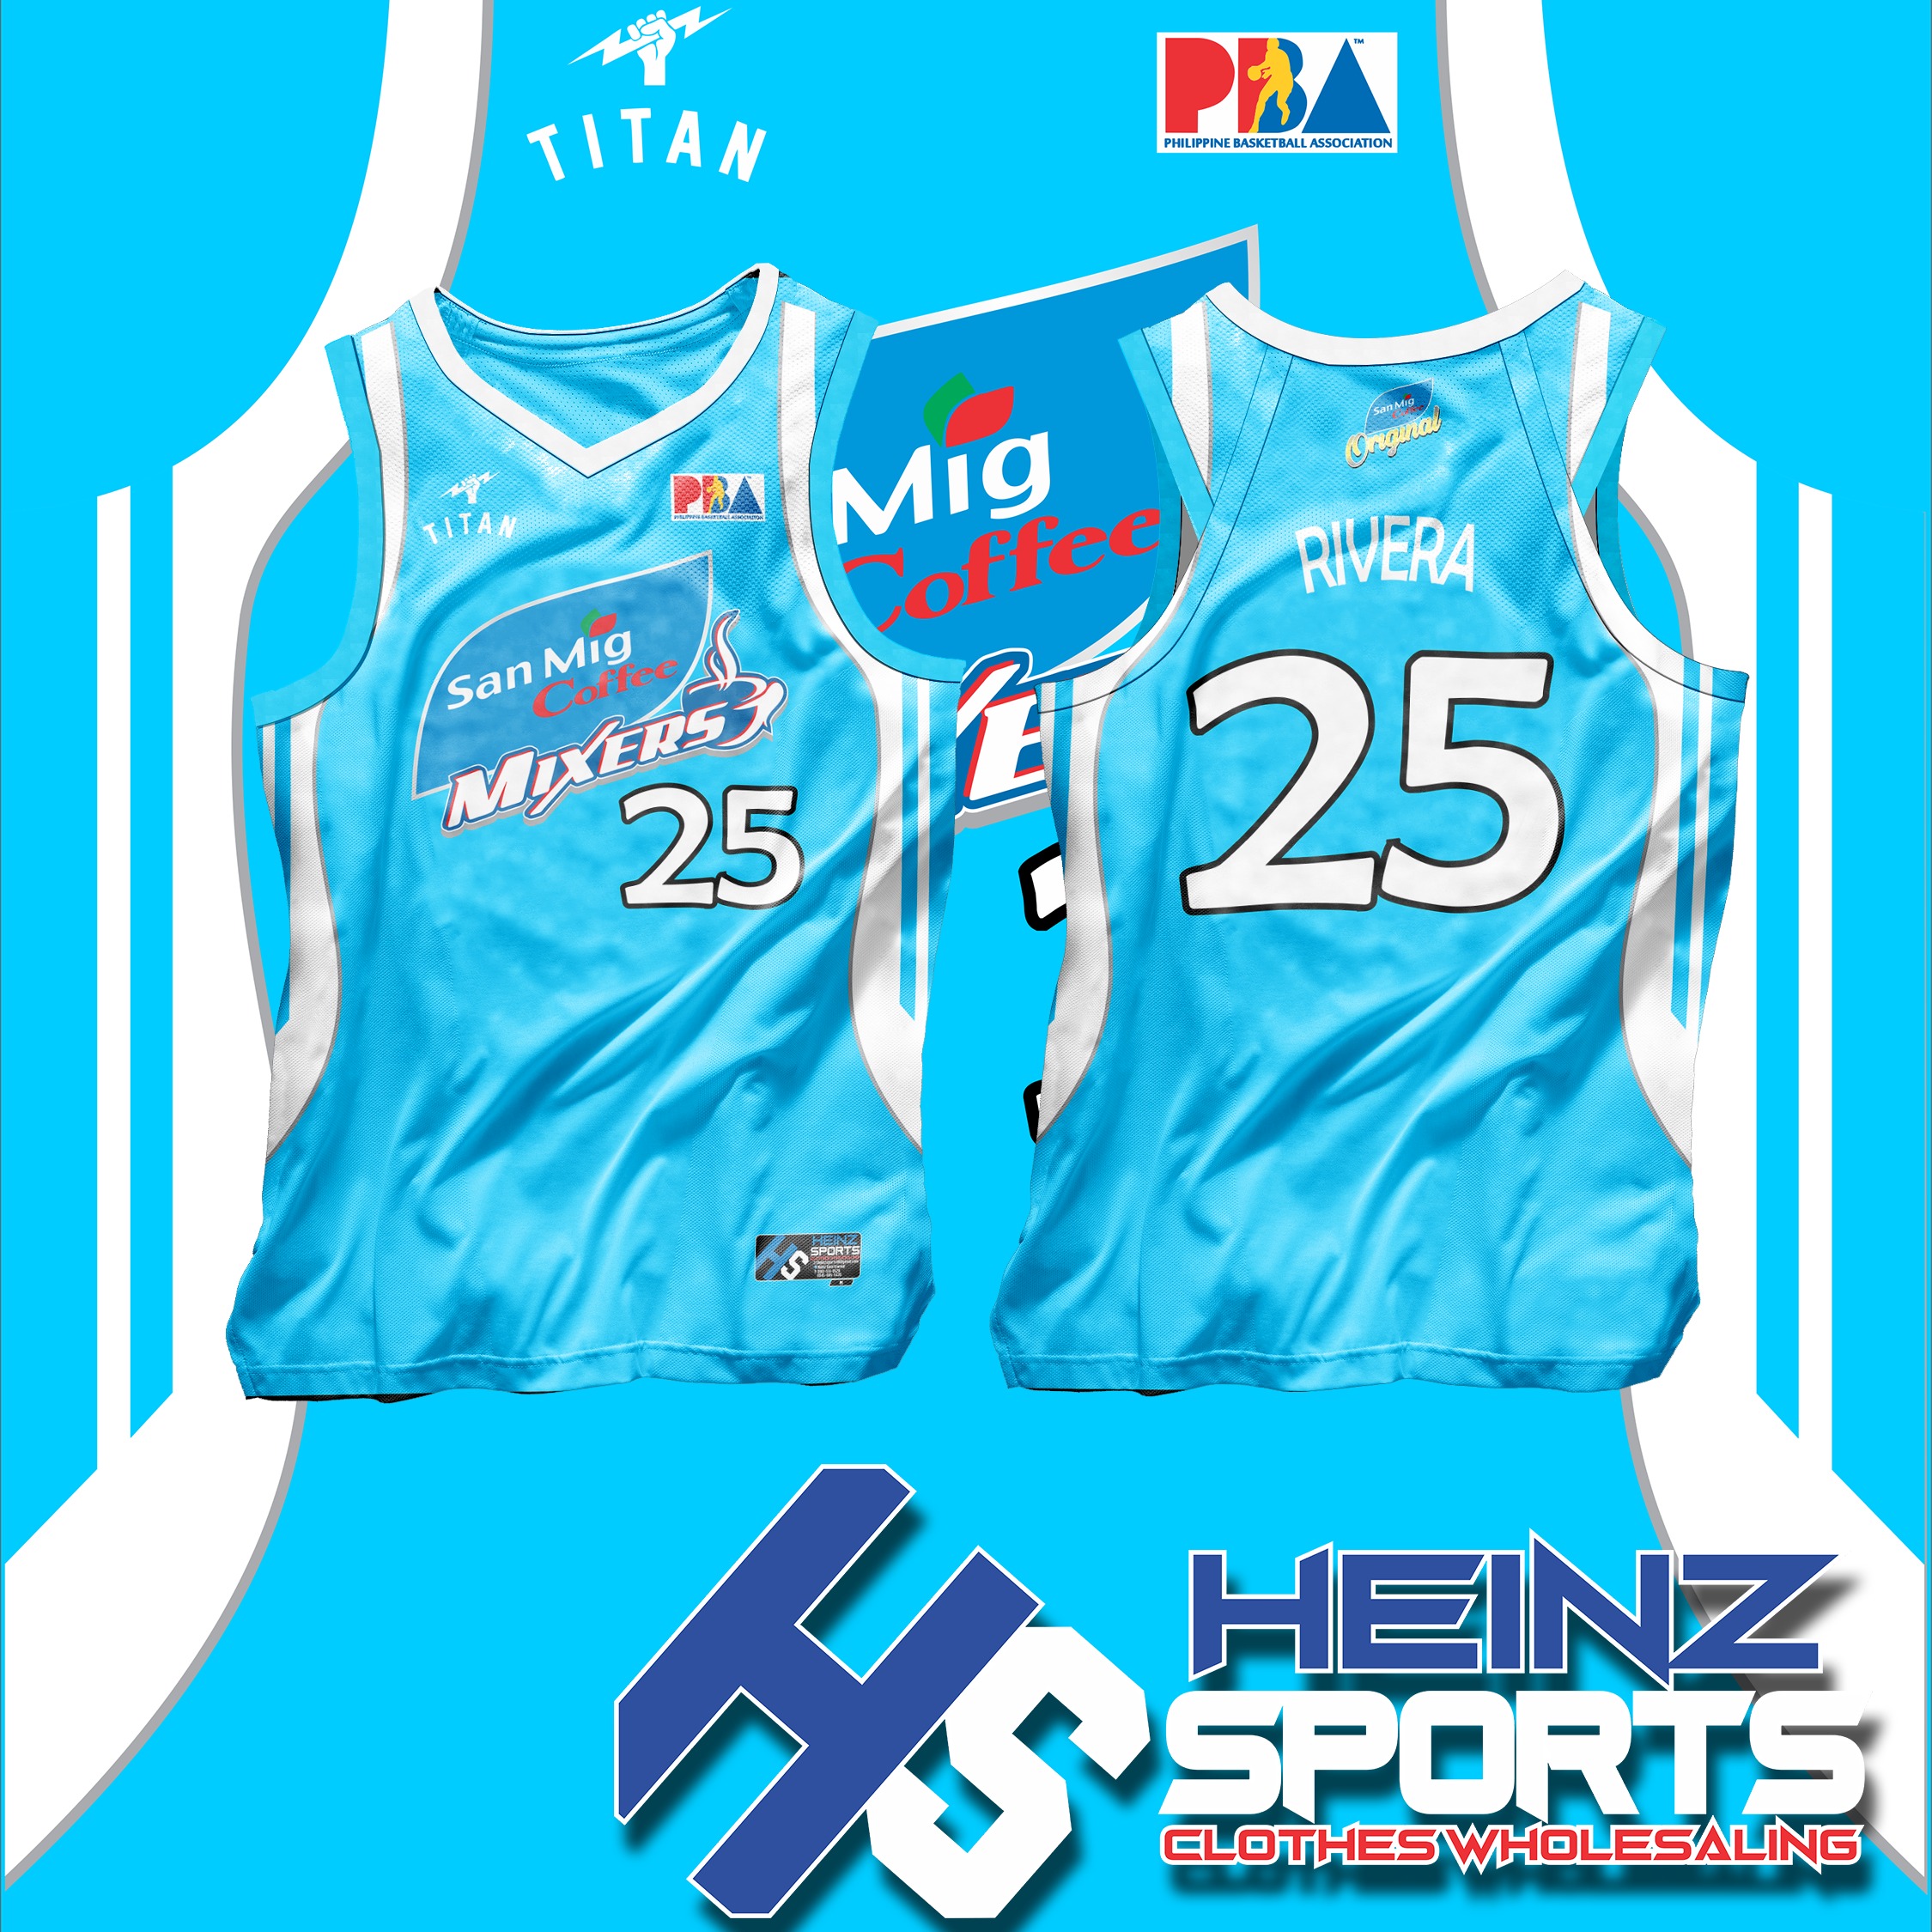 SAN MIGUEL BEERMEN BASKETBALL JERSEY FREE CUSTOMIZE NAME AND NUMBER ONLY  full sublimation